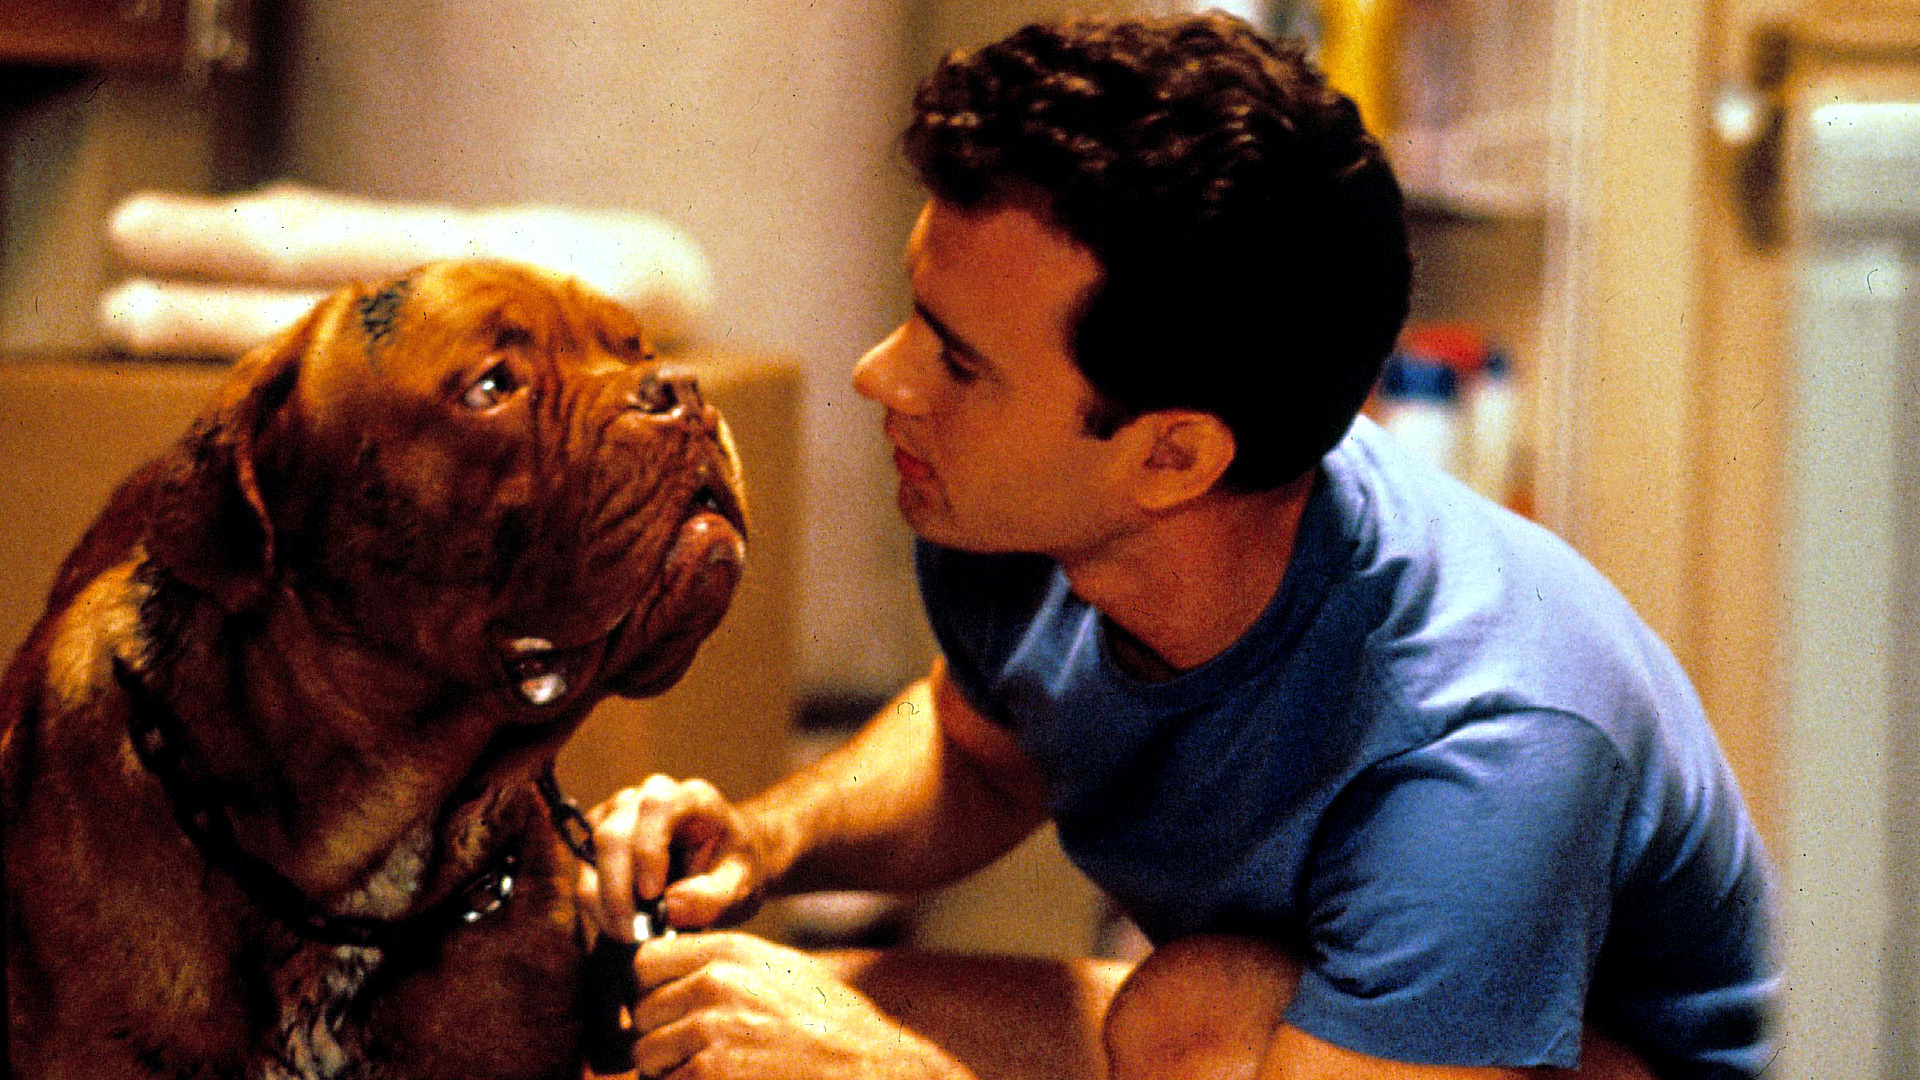 <p>When it came time to pitch “Turner & Hooch,” the creators said, “So it’s a buddy-cop comedy, except one of the partners is a dog.” The studio said no, but then the creators asked, “What if the human cop is Tom Hanks?” And the studio instantly agreed to a deal. OK, that’s probably not what actually happened, but it seems like the only way the 1989 comedy could have come about. Predictably, critics weren’t especially kind to “Turner & Hooch,” but fans (us included) lapped it up to the tune of $71 million.</p>